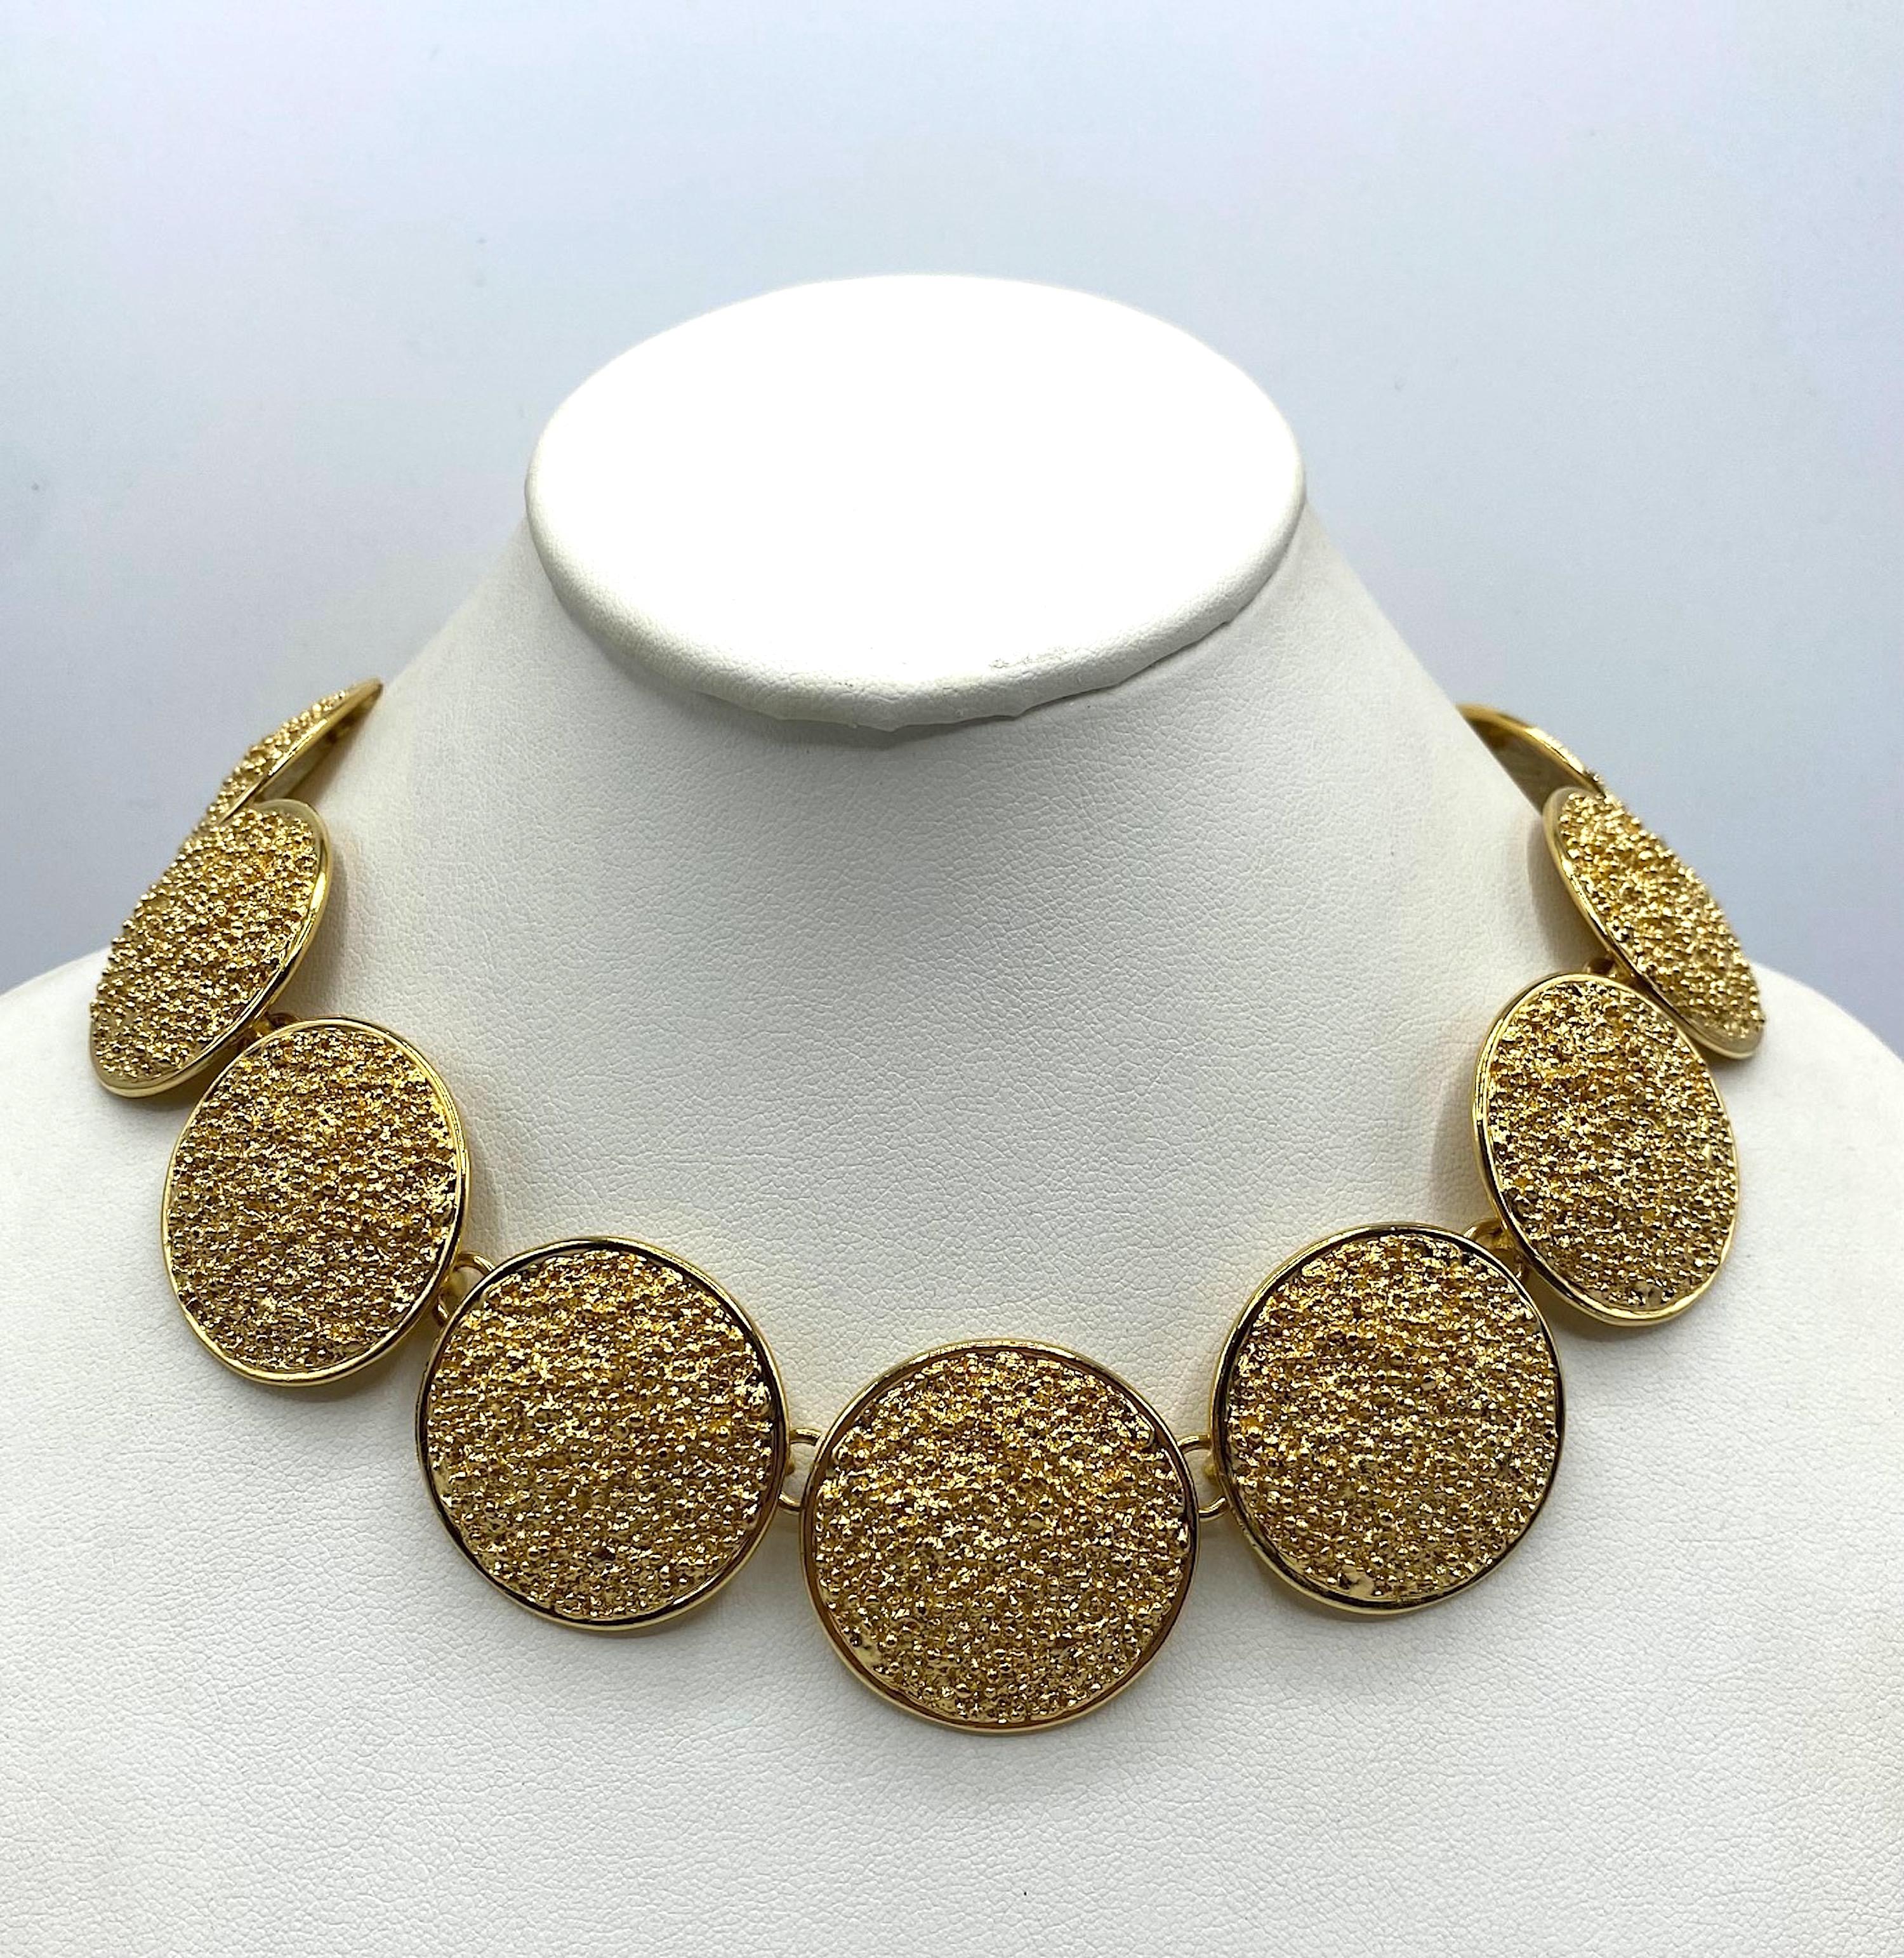 Presented is an impressive vintage Yves Saint Laurent necklace from the mid 1980s to early 1990s. It is comprised of 11 lightly domed disk links measuring 1.25 inches in diameter and  having a rough gold nugget texture. The necklace is 19.25 inches